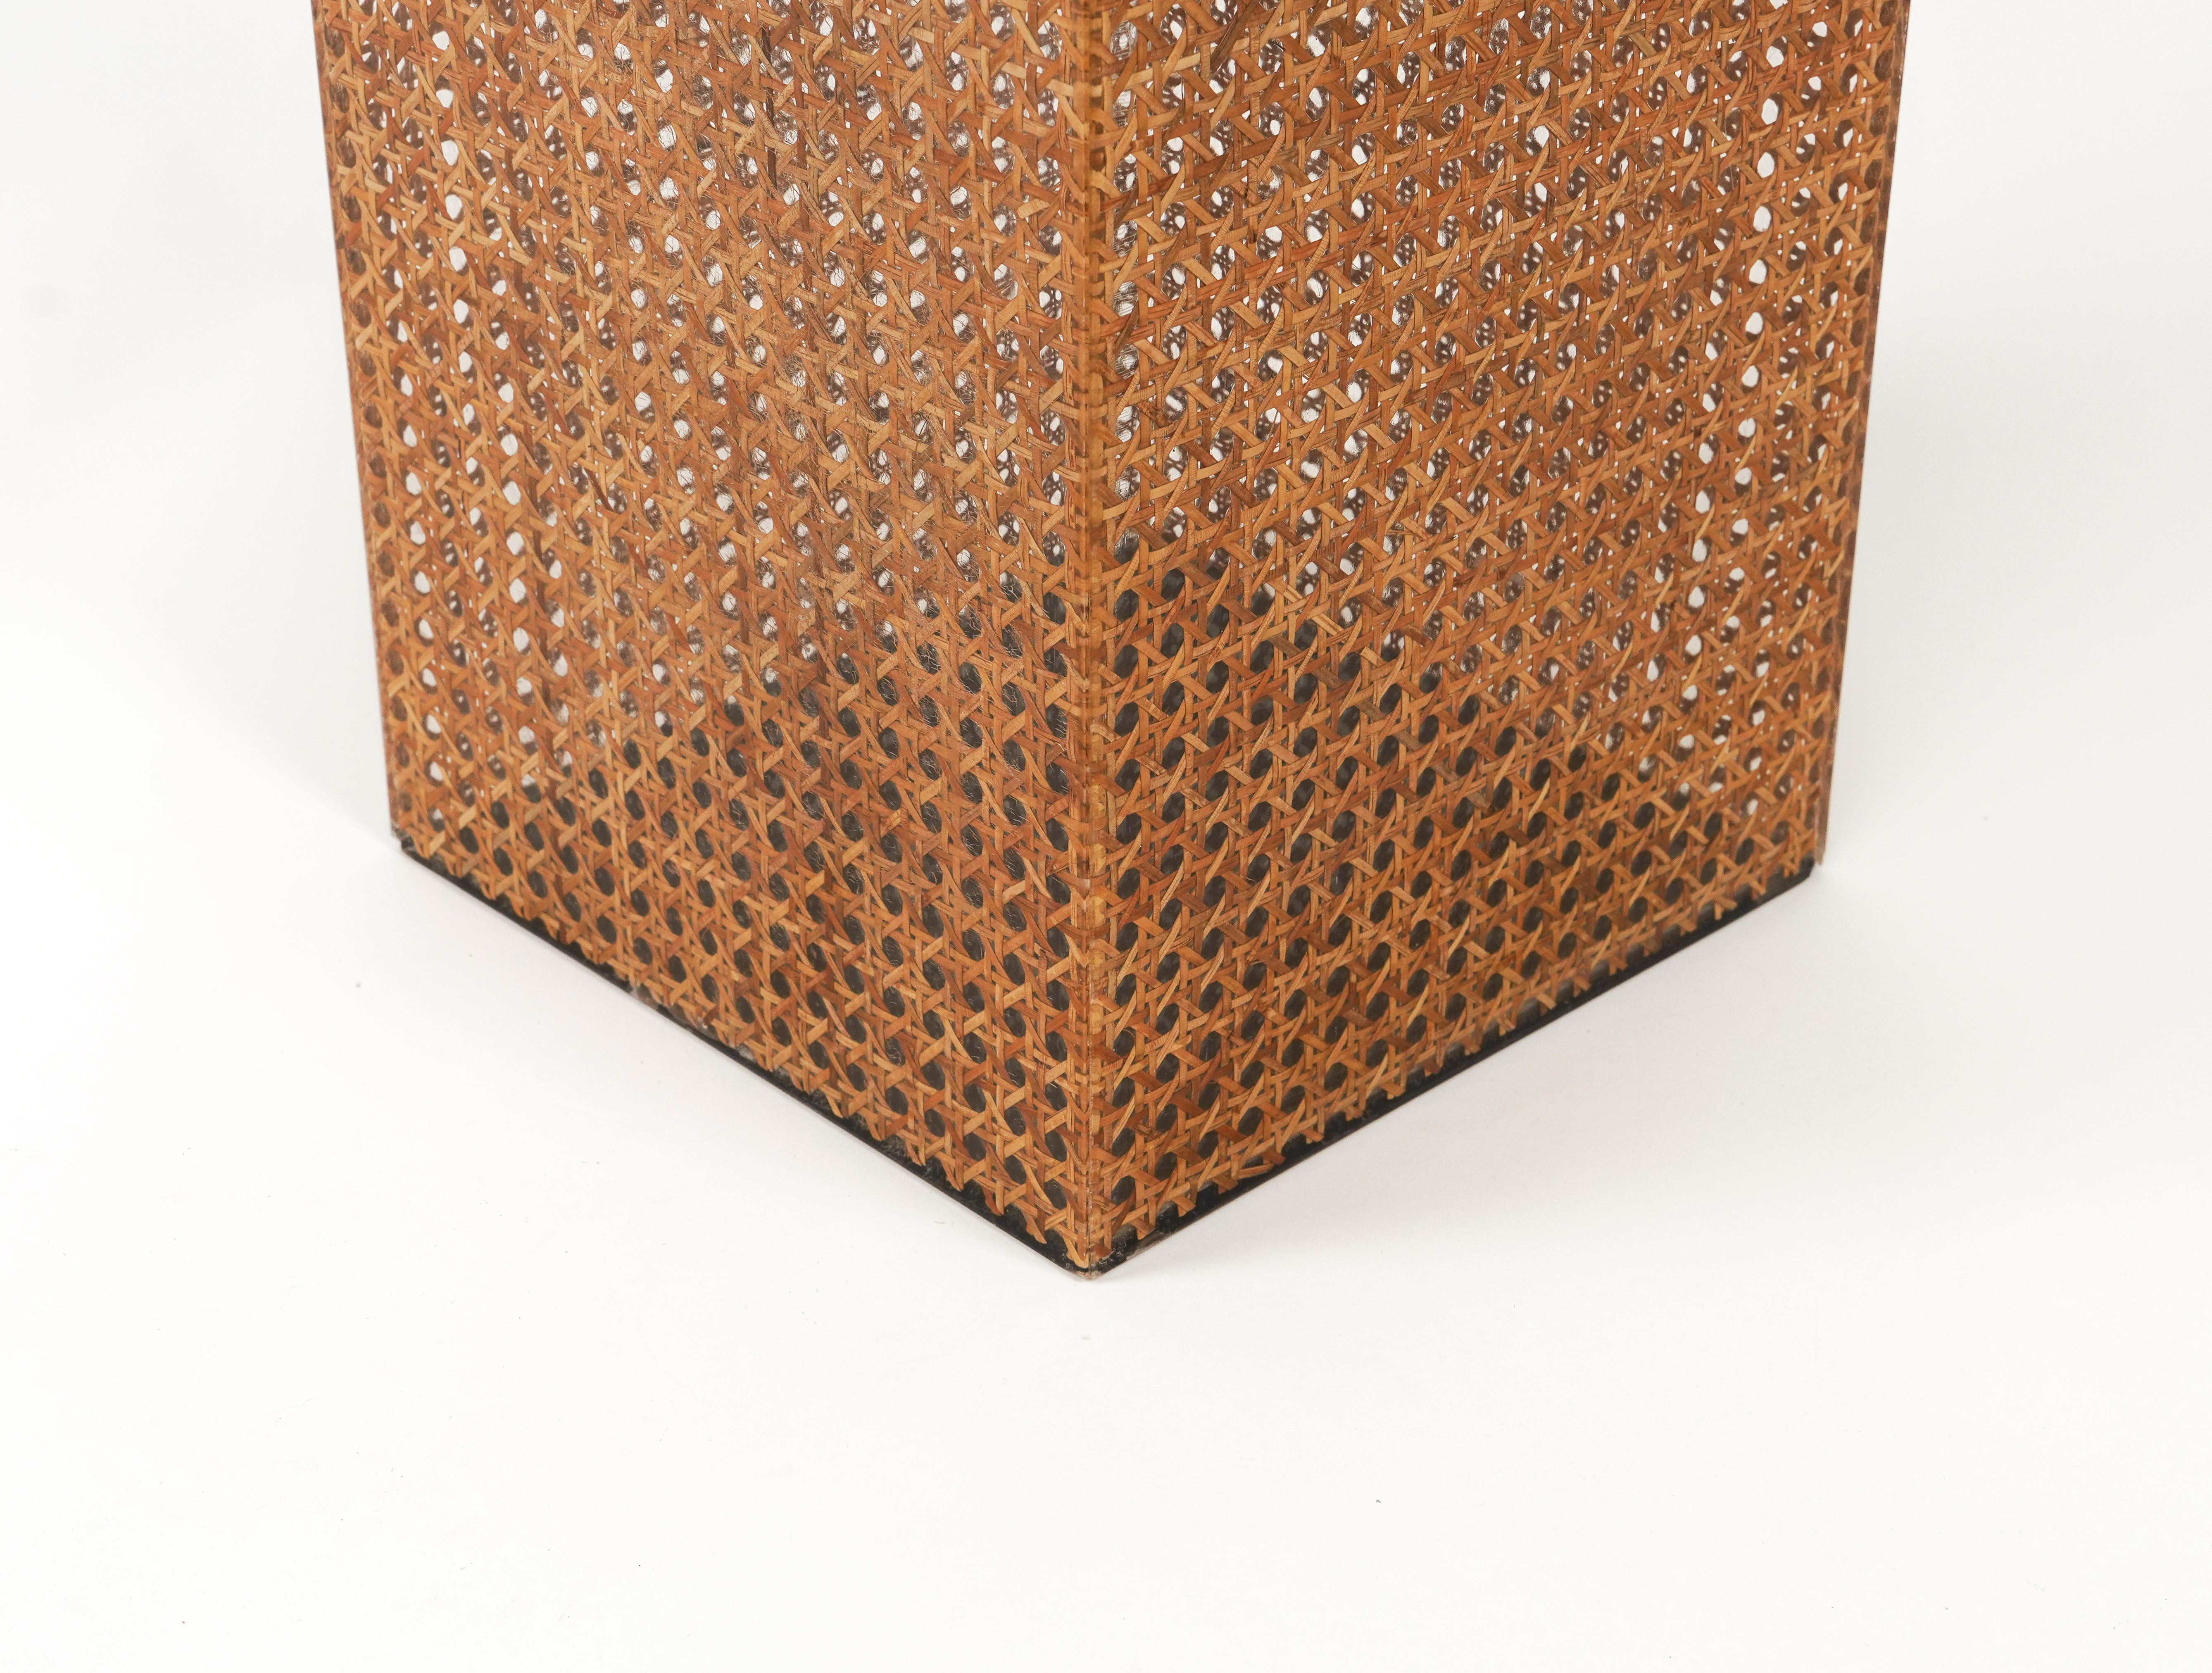 Umbrella Stand in Lucite, Rattan and Brass Christian Dior Style, Italy 1970s For Sale 6